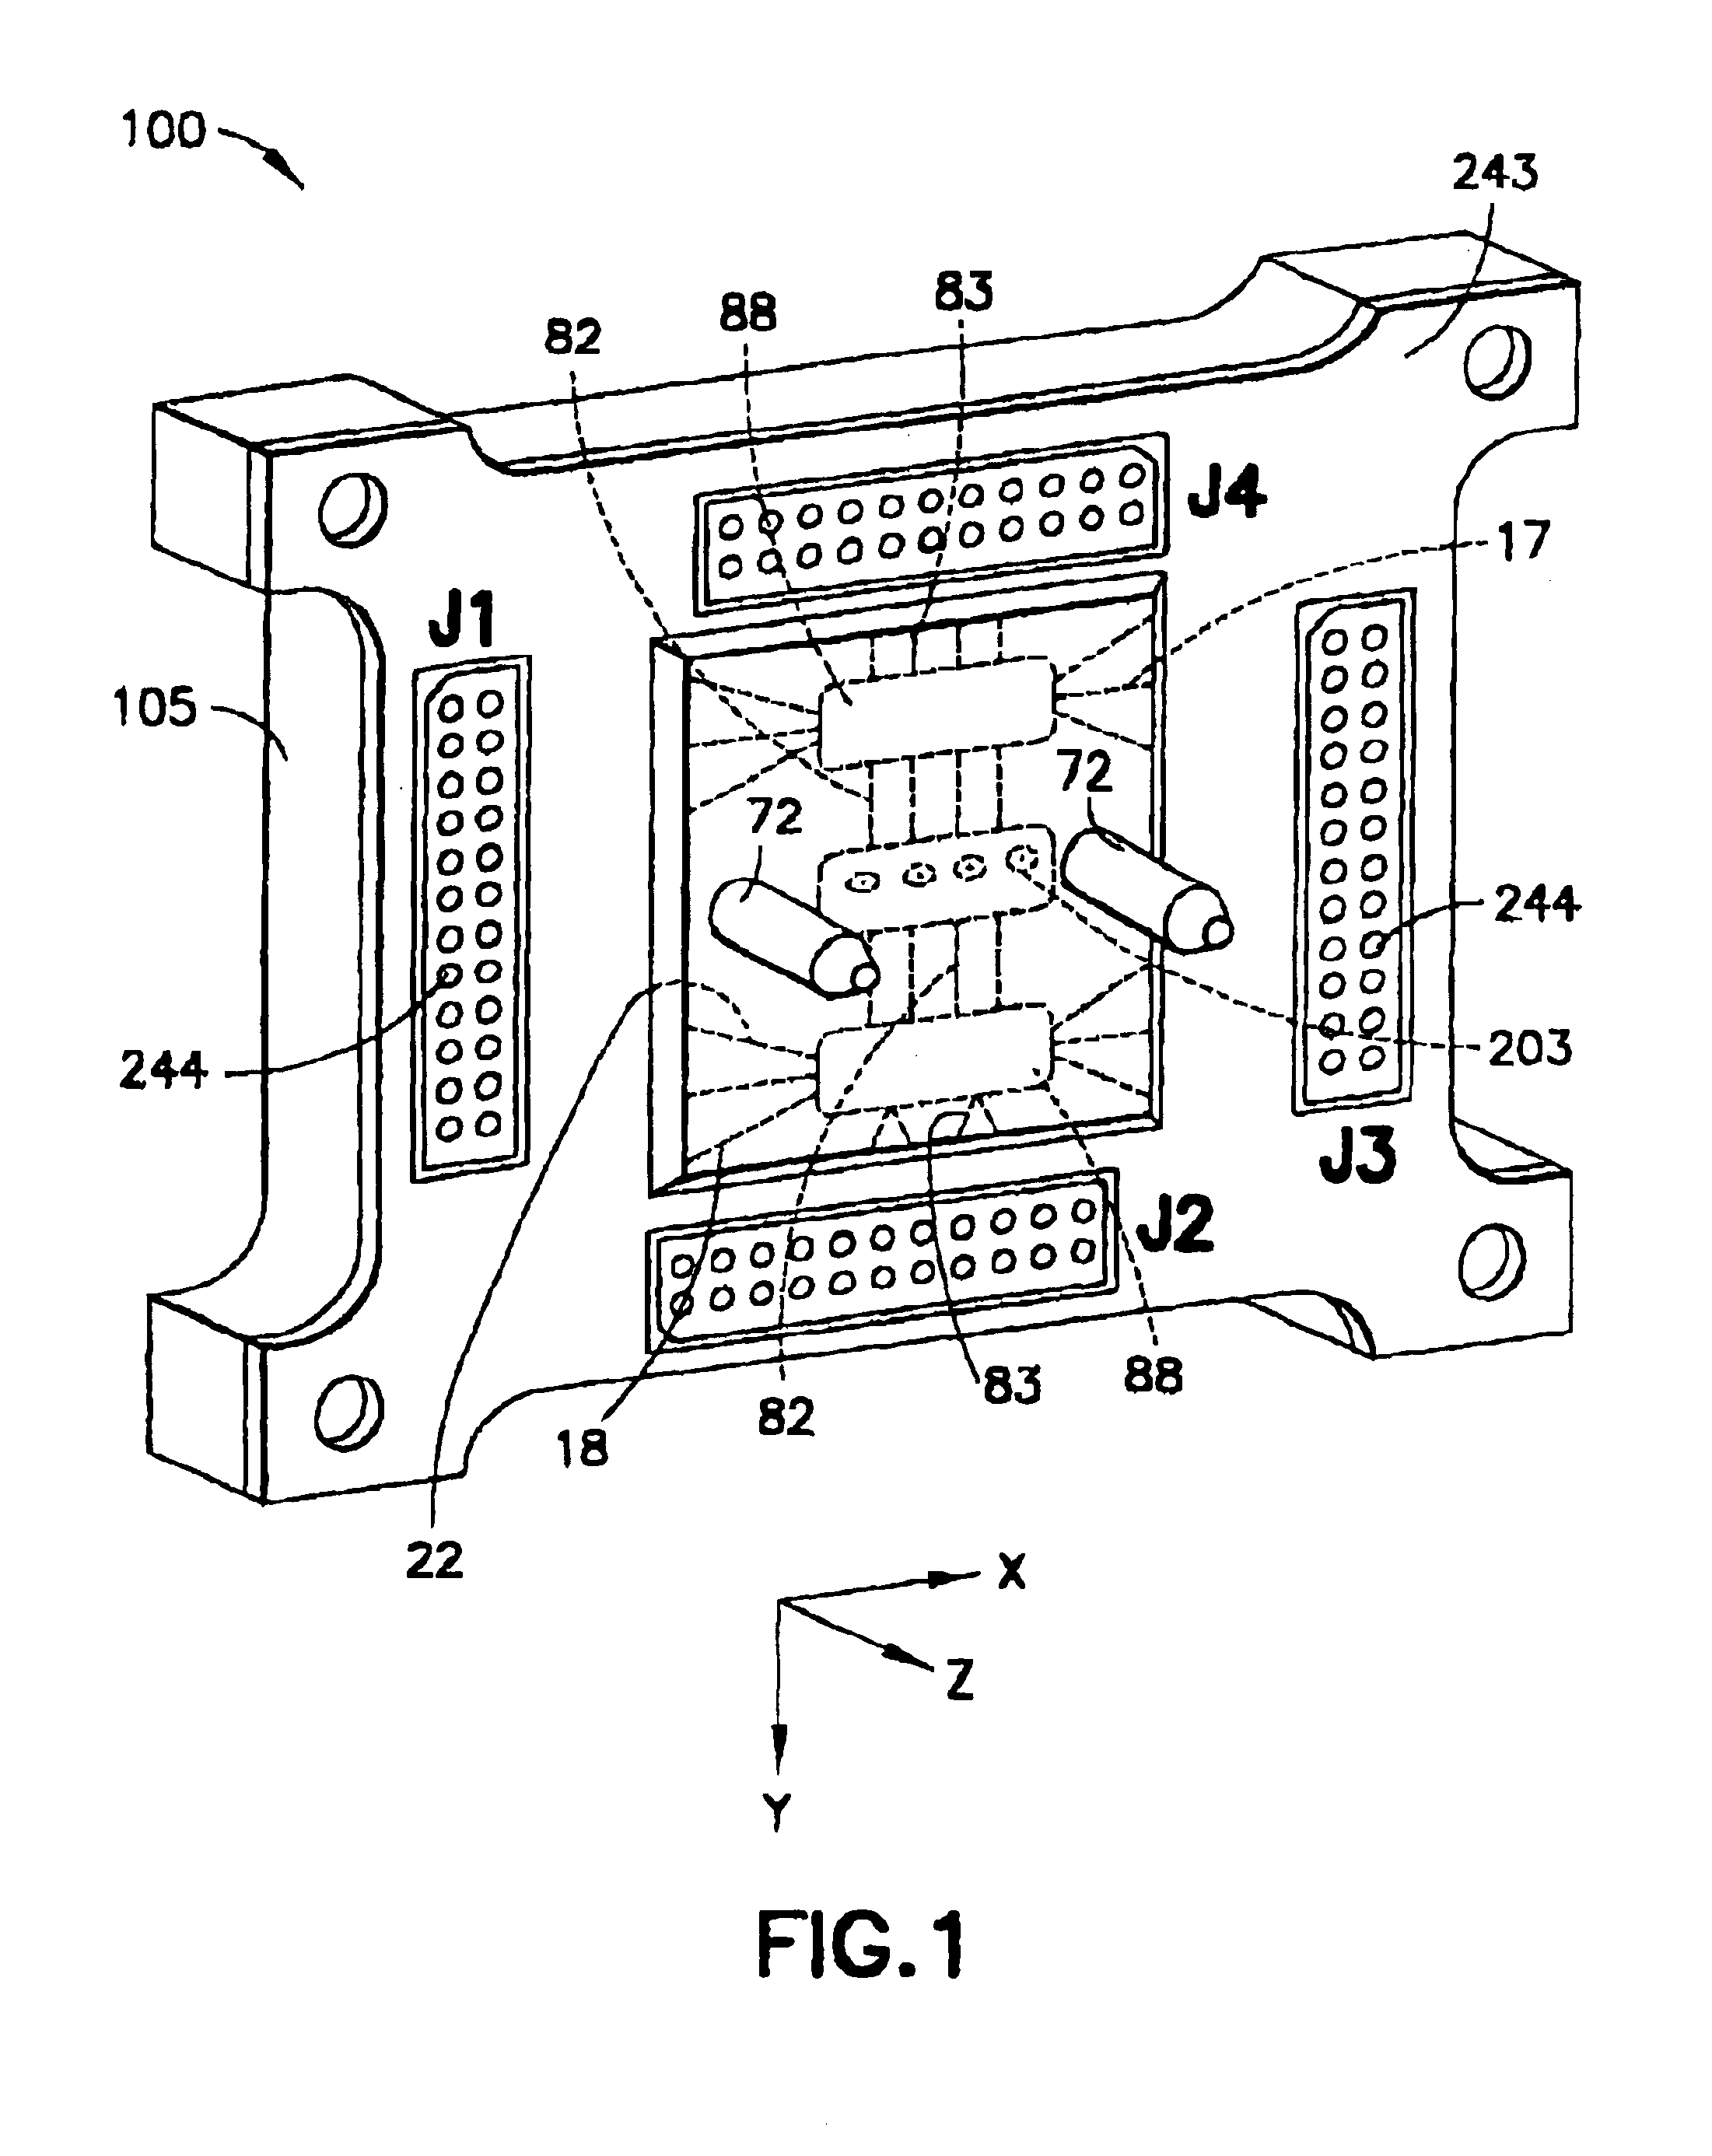 Small-scale optoelectronic package